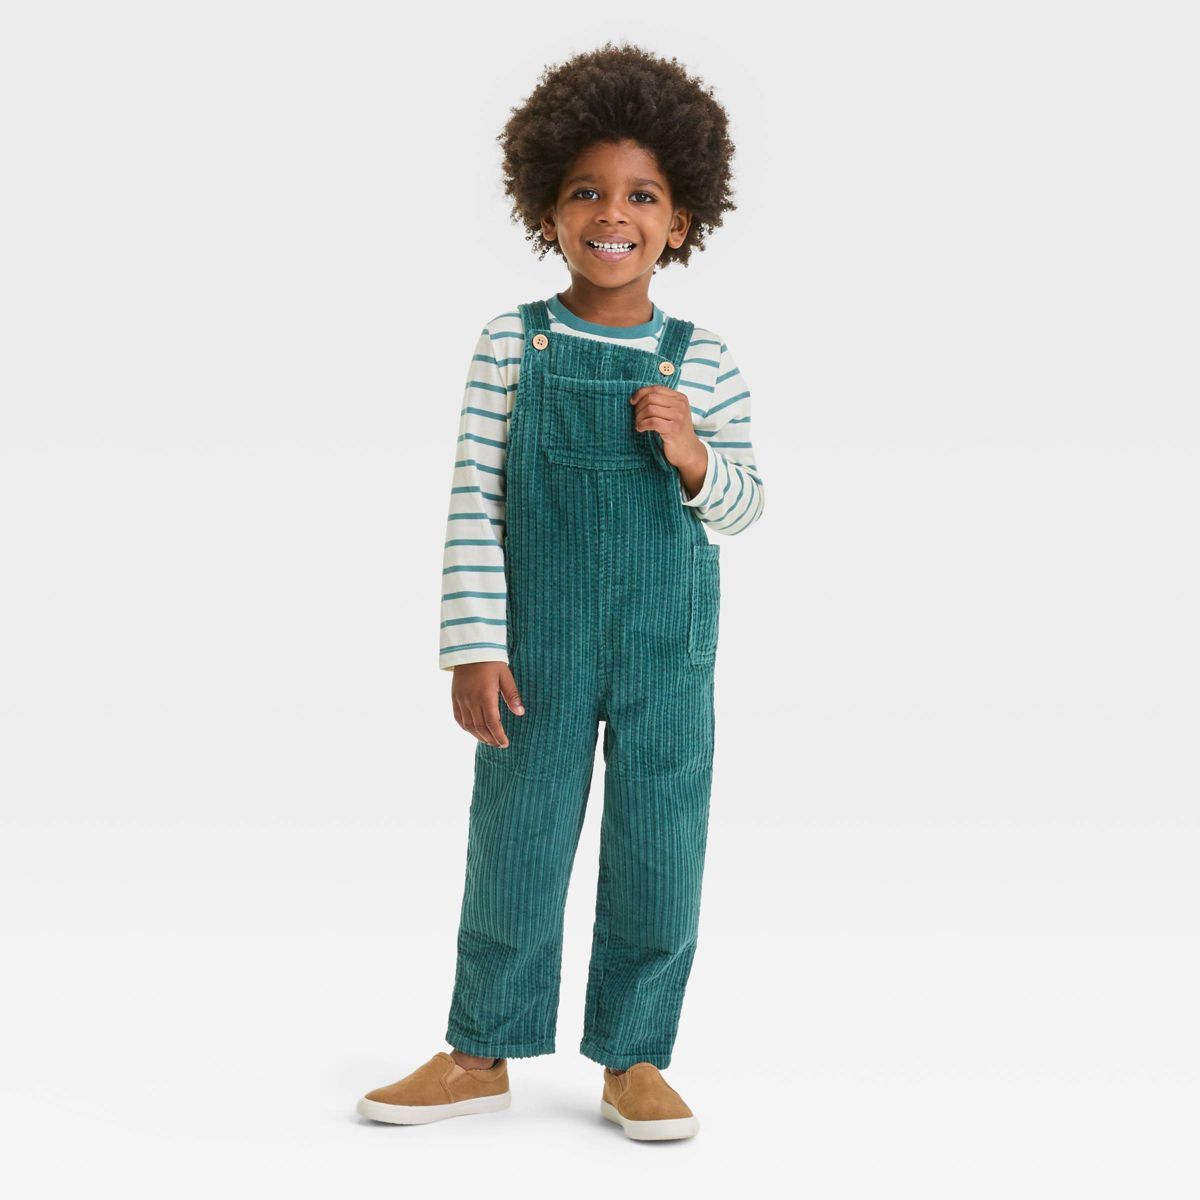 Toddler Boys' 2pc Long Sleeve T-Shirt and Corduroy Overalls Set - Cat & Jack™ Teal Green | Target